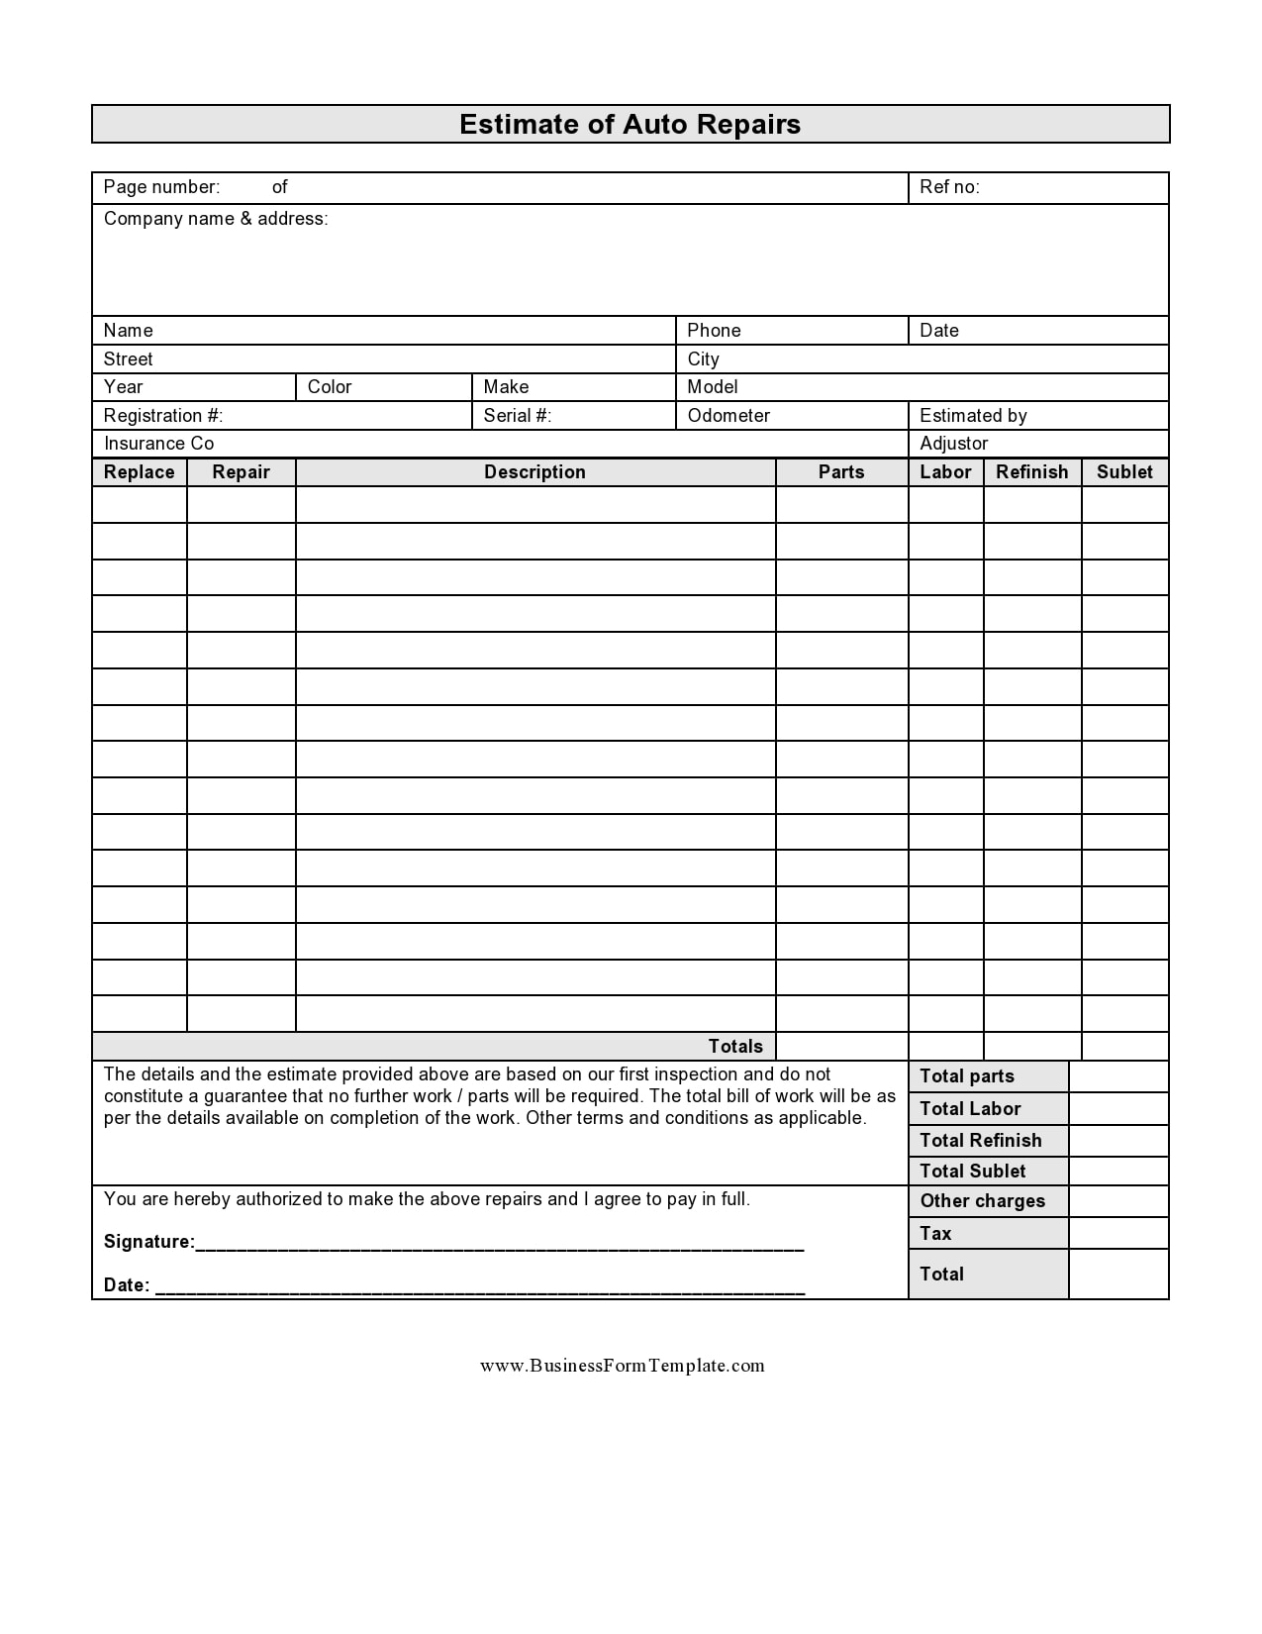 Auto Repair Templates Free - Deenajungshopping8 Within Mechanic Shop Invoice Templates